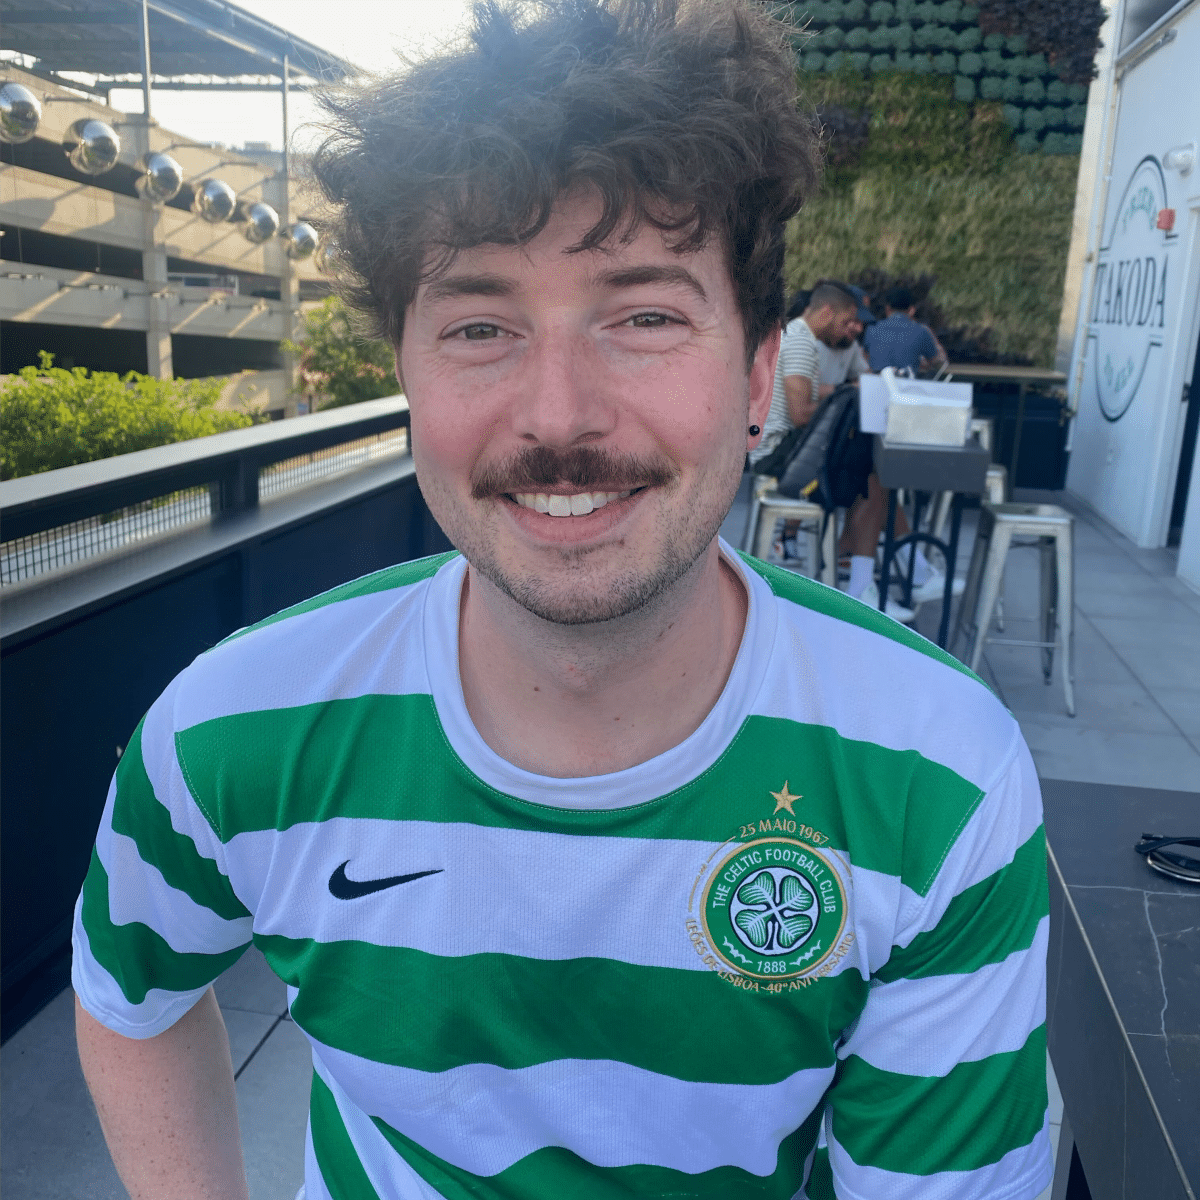 A white man with brown curly hair and a mustache wearing a white and green striped Nike shirt and he is smiling.